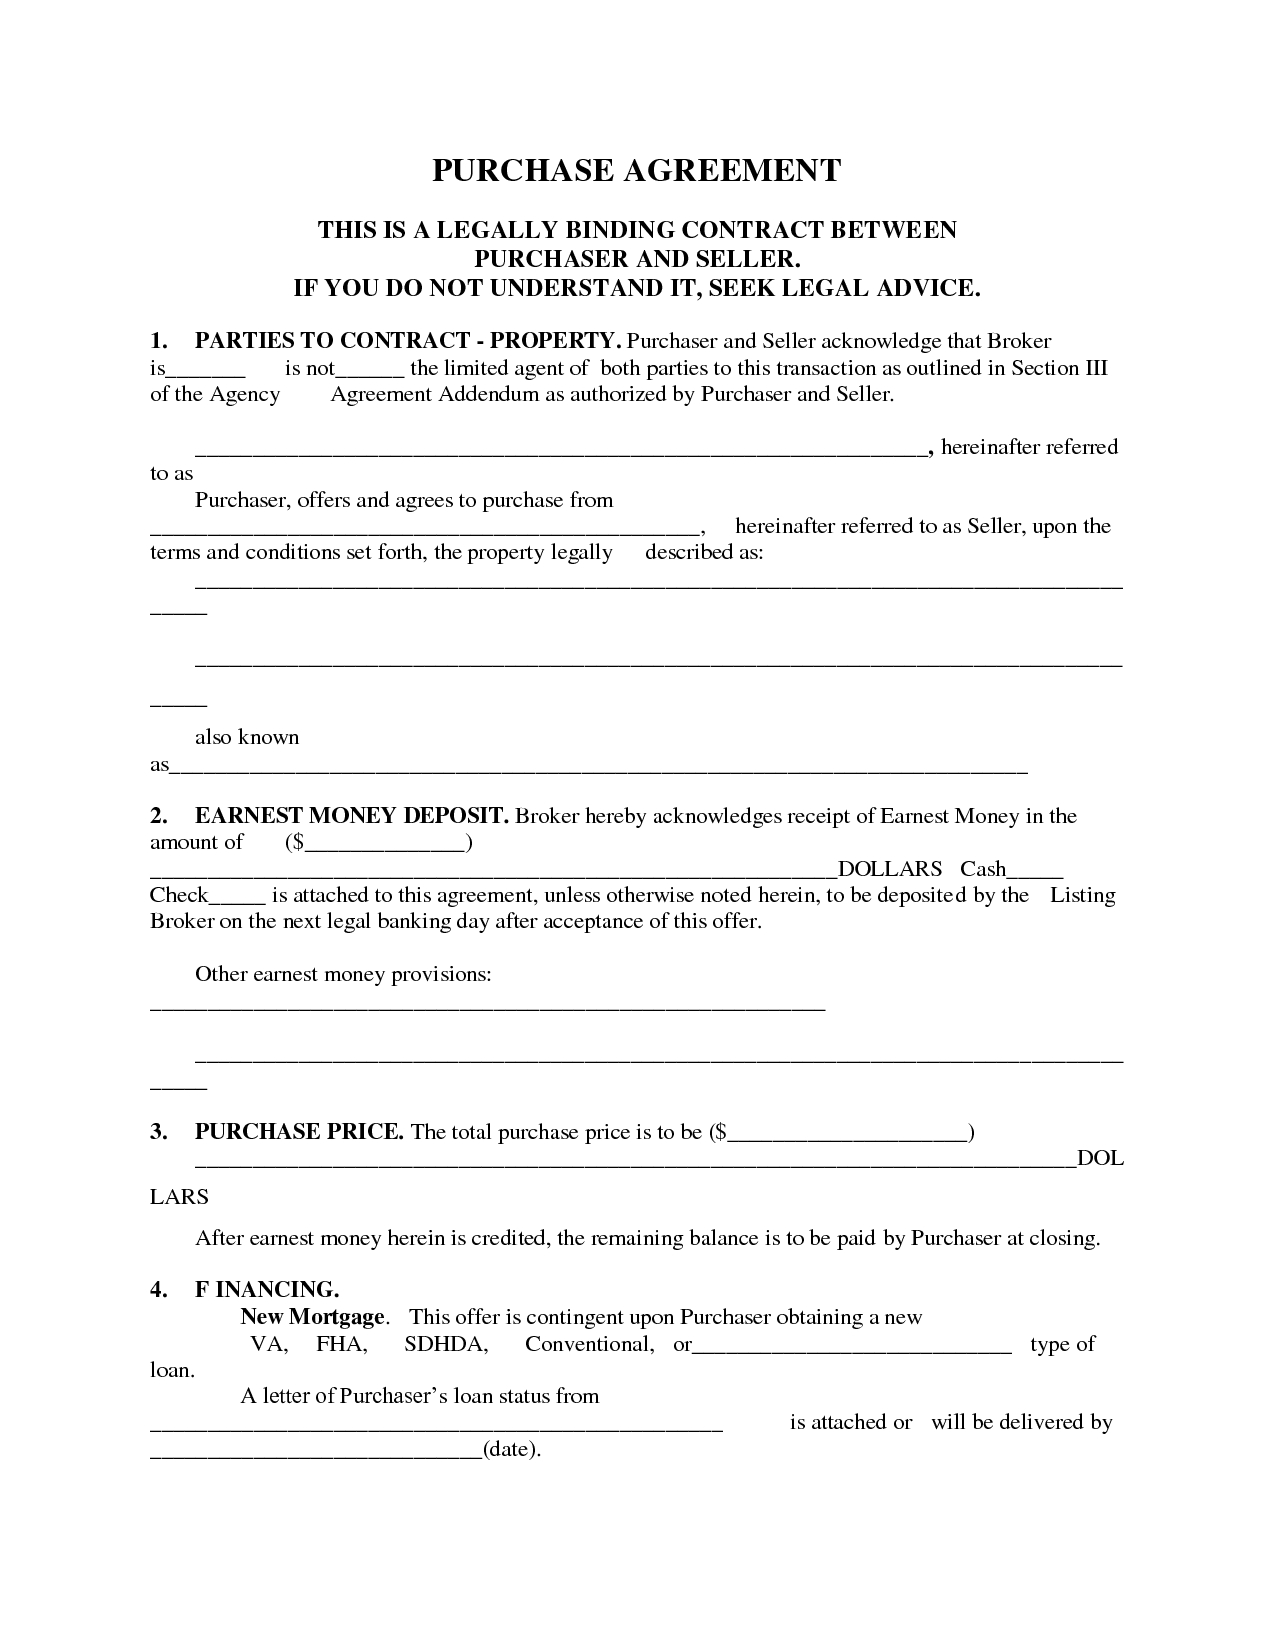 indiana-real-estate-purchase-agreement-10-simple-free-printable-free-printable-real-estate